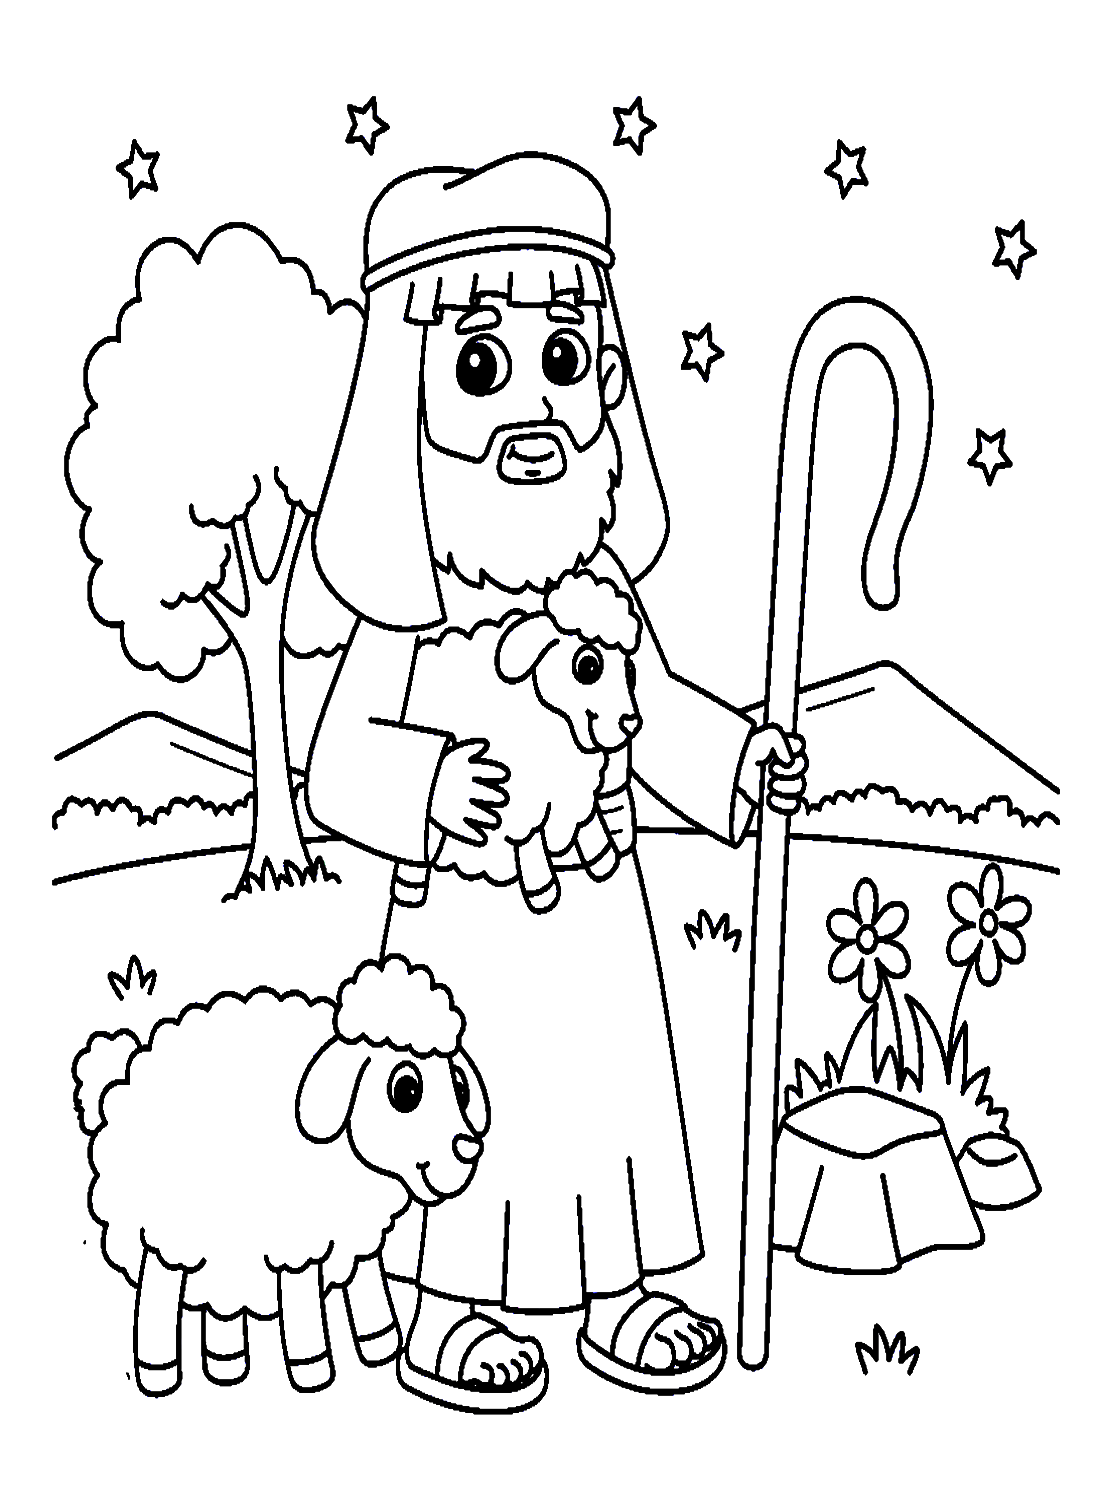 Christian Shepherd With Lambs Coloring Page - Free Printable Coloring Pages